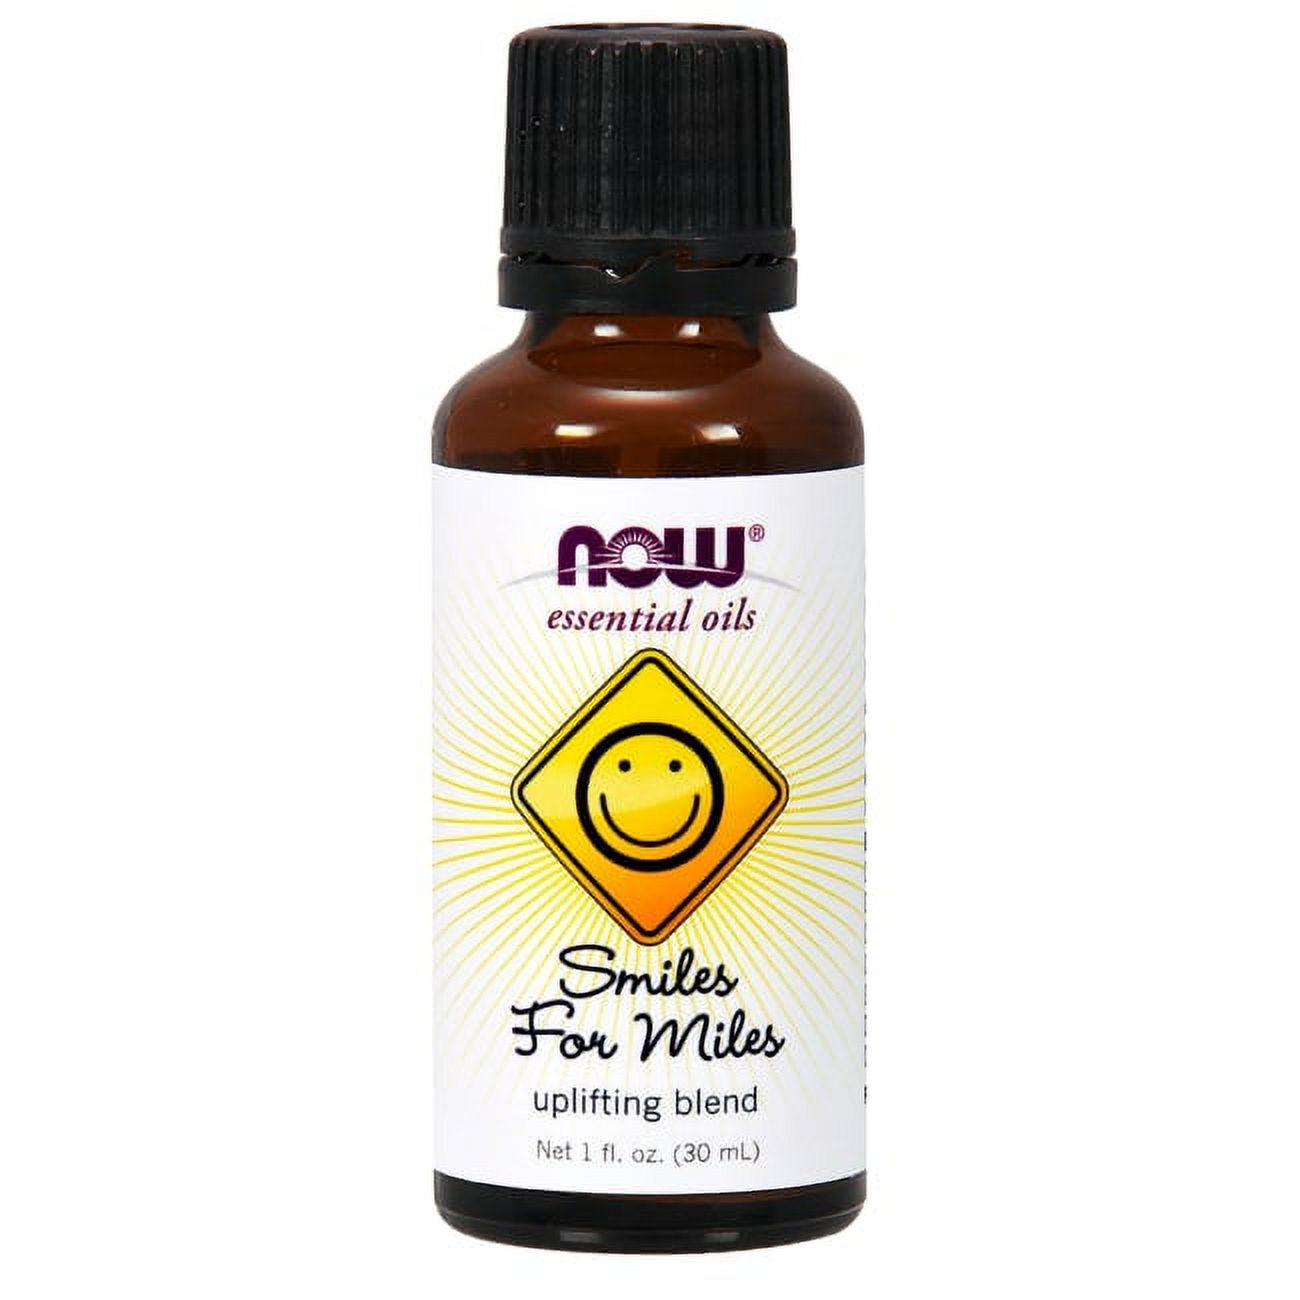 Smiles for Miles - Essential Oil - 1 fl oz (30 ml) by NOW - image 1 of 2